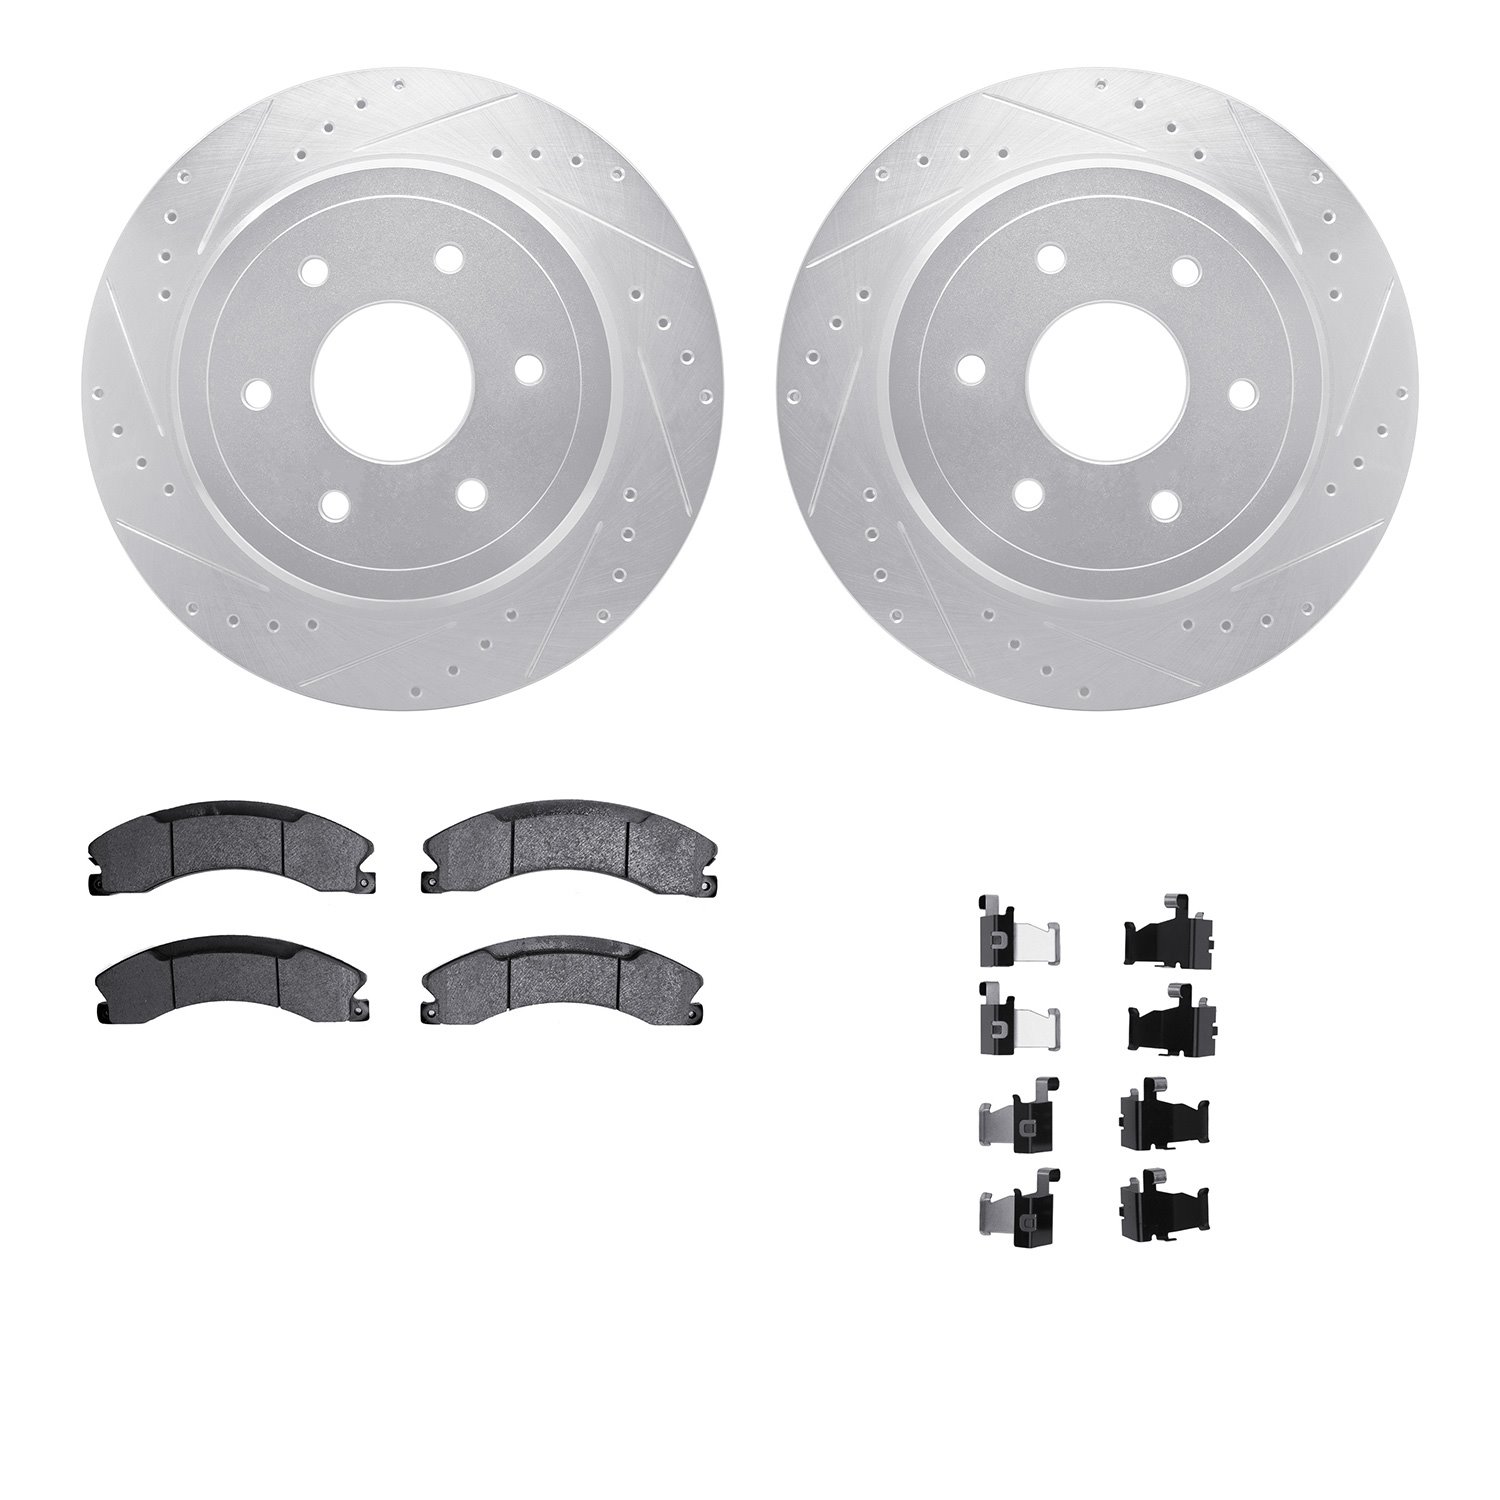 7512-67123 Drilled/Slotted Brake Rotors w/5000 Advanced Brake Pads Kit & Hardware [Silver], Fits Select Infiniti/Nissan, Positio